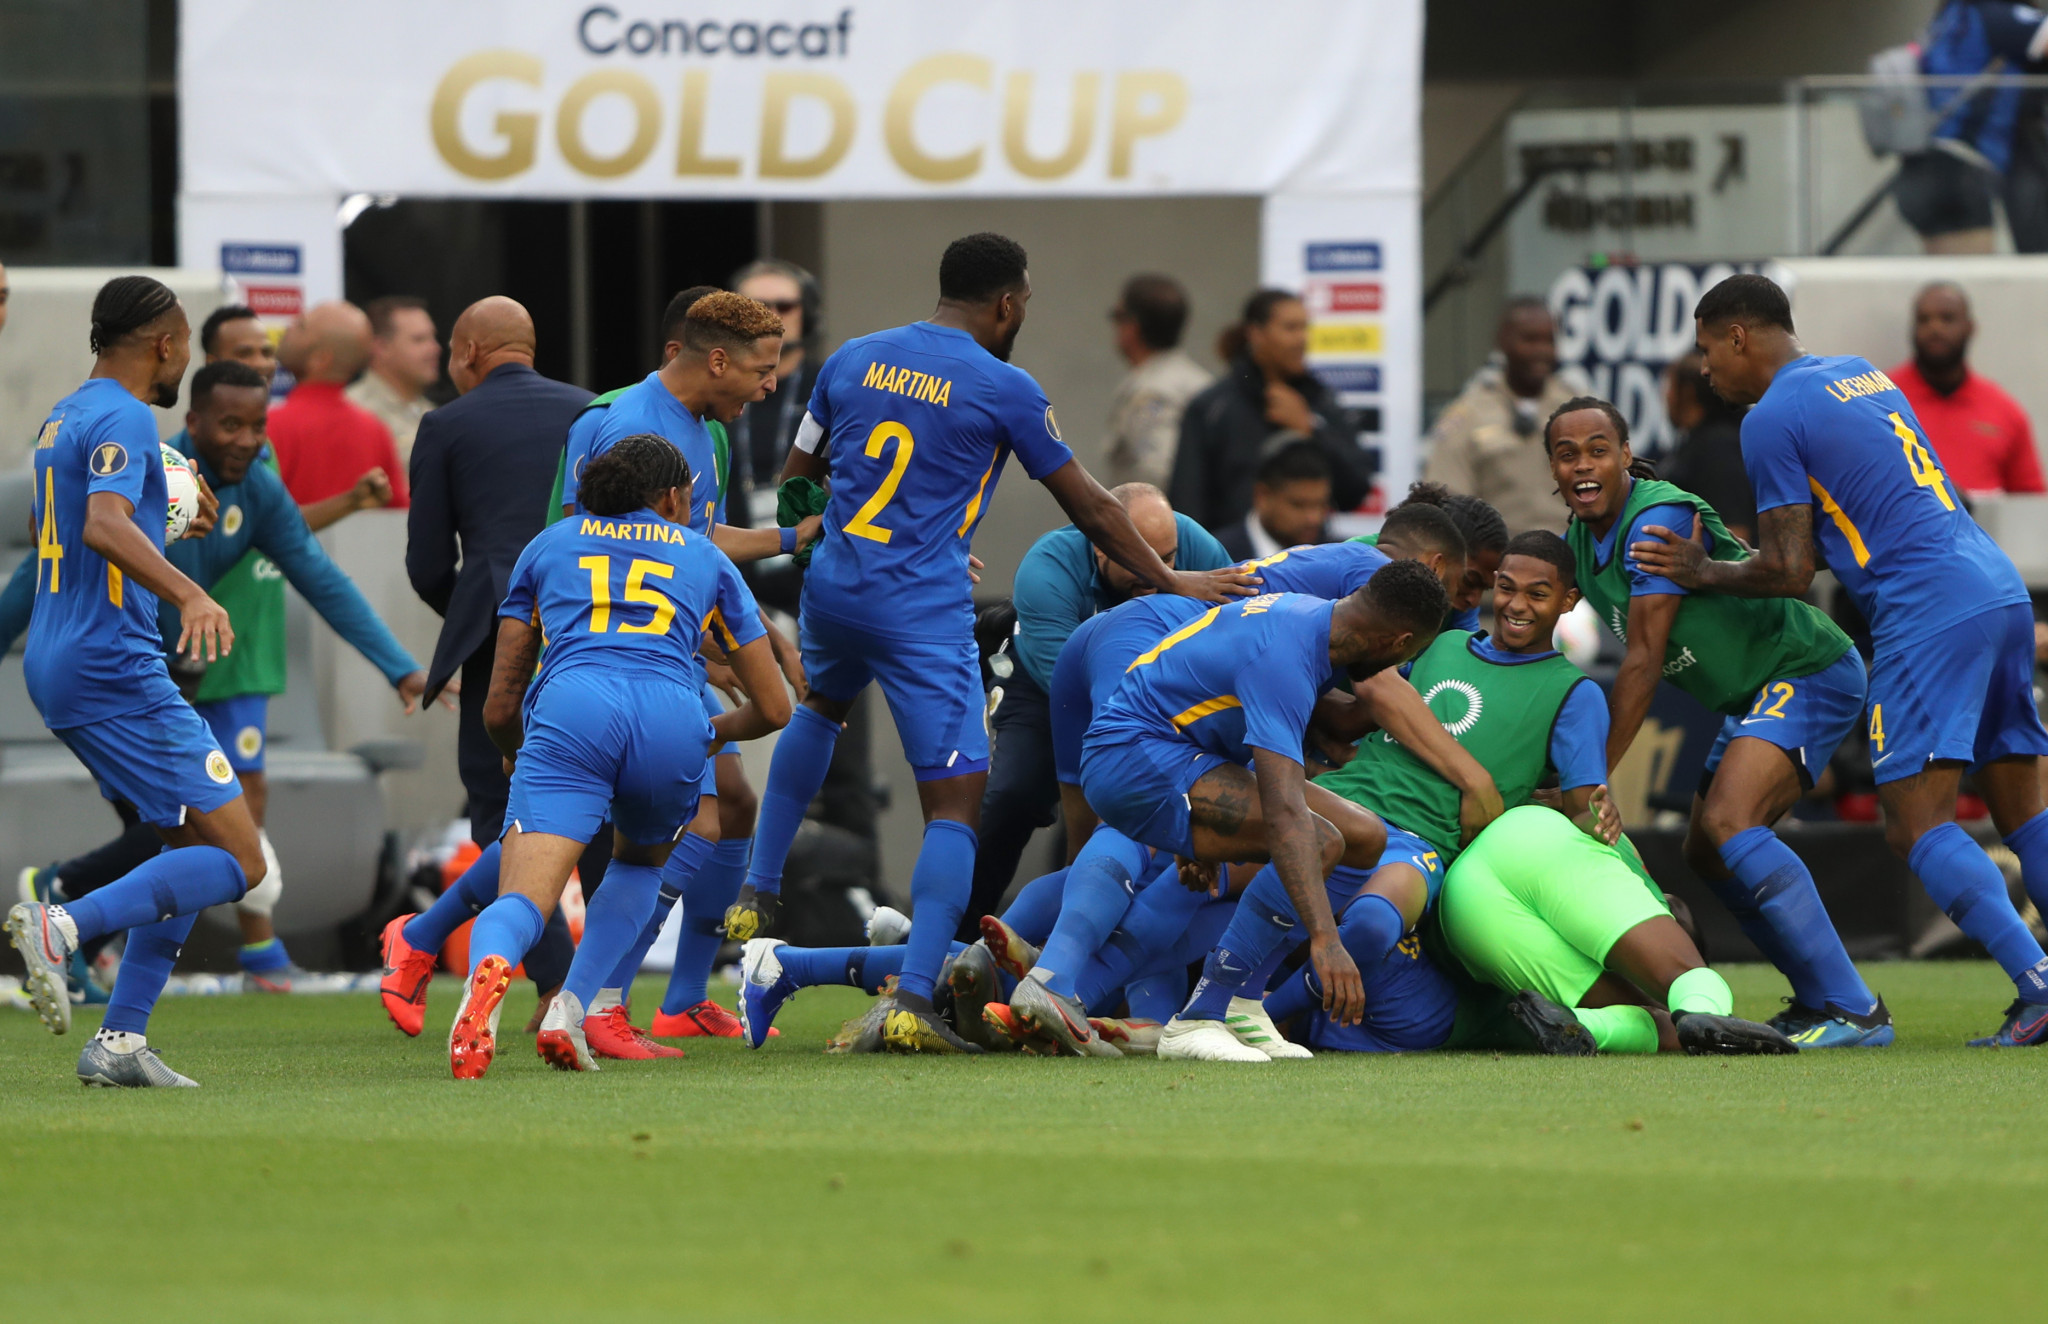 Jurien Gaari scored a dramatic goal in the last seconds of the game to save Curaçao from Gold Cup elimination ©Getty Images